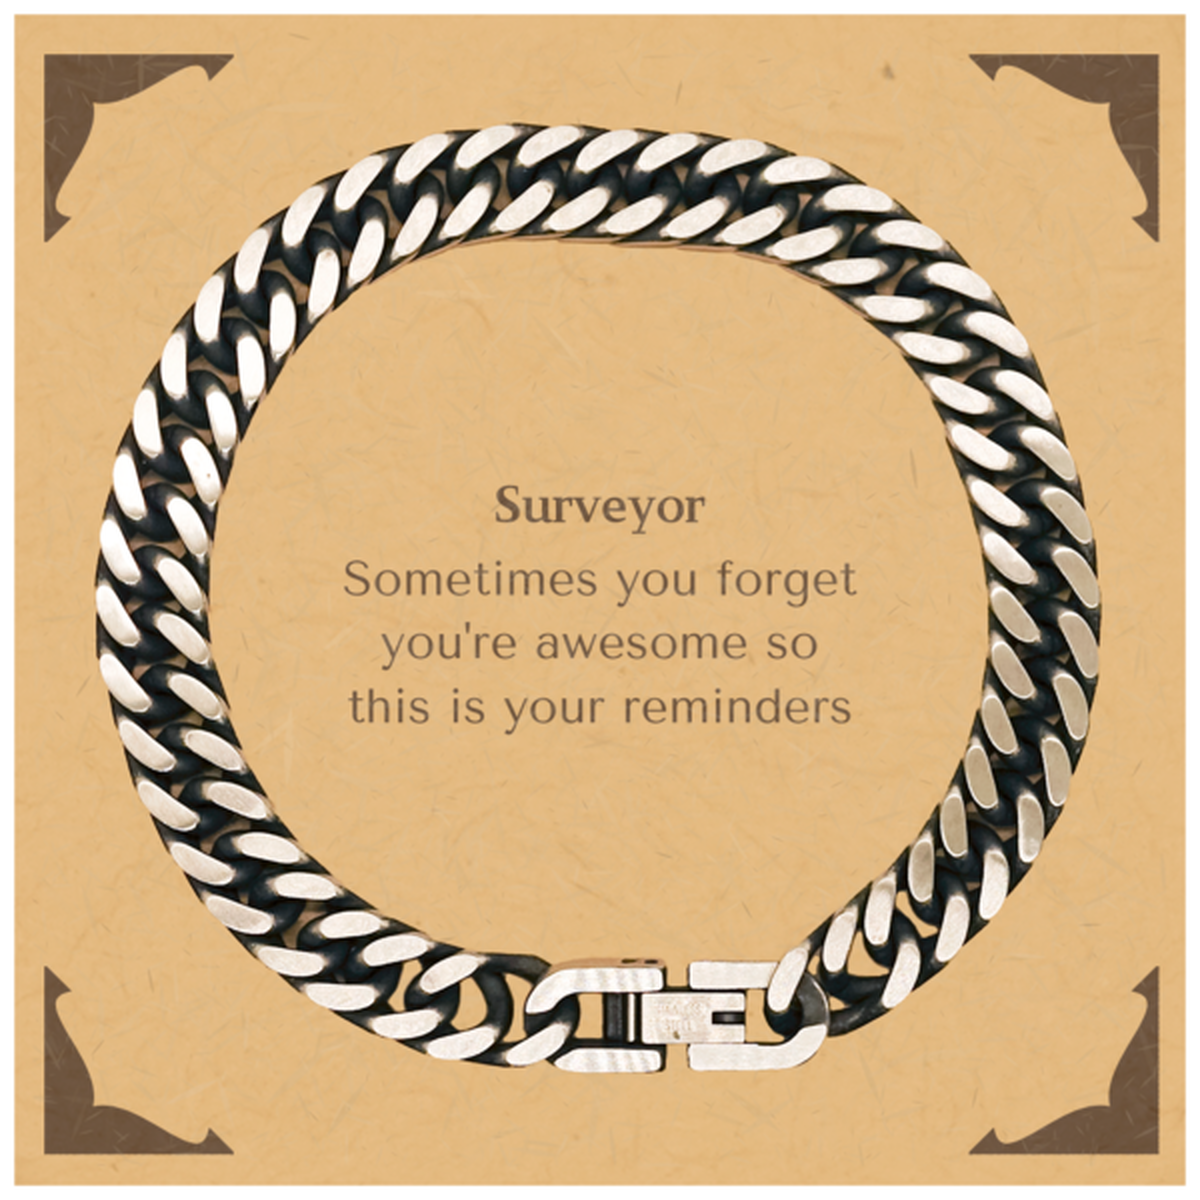 Sentimental Surveyor Cuban Link Chain Bracelet, Surveyor Sometimes you forget you're awesome so this is your reminders, Graduation Christmas Birthday Gifts for Surveyor, Men, Women, Coworkers